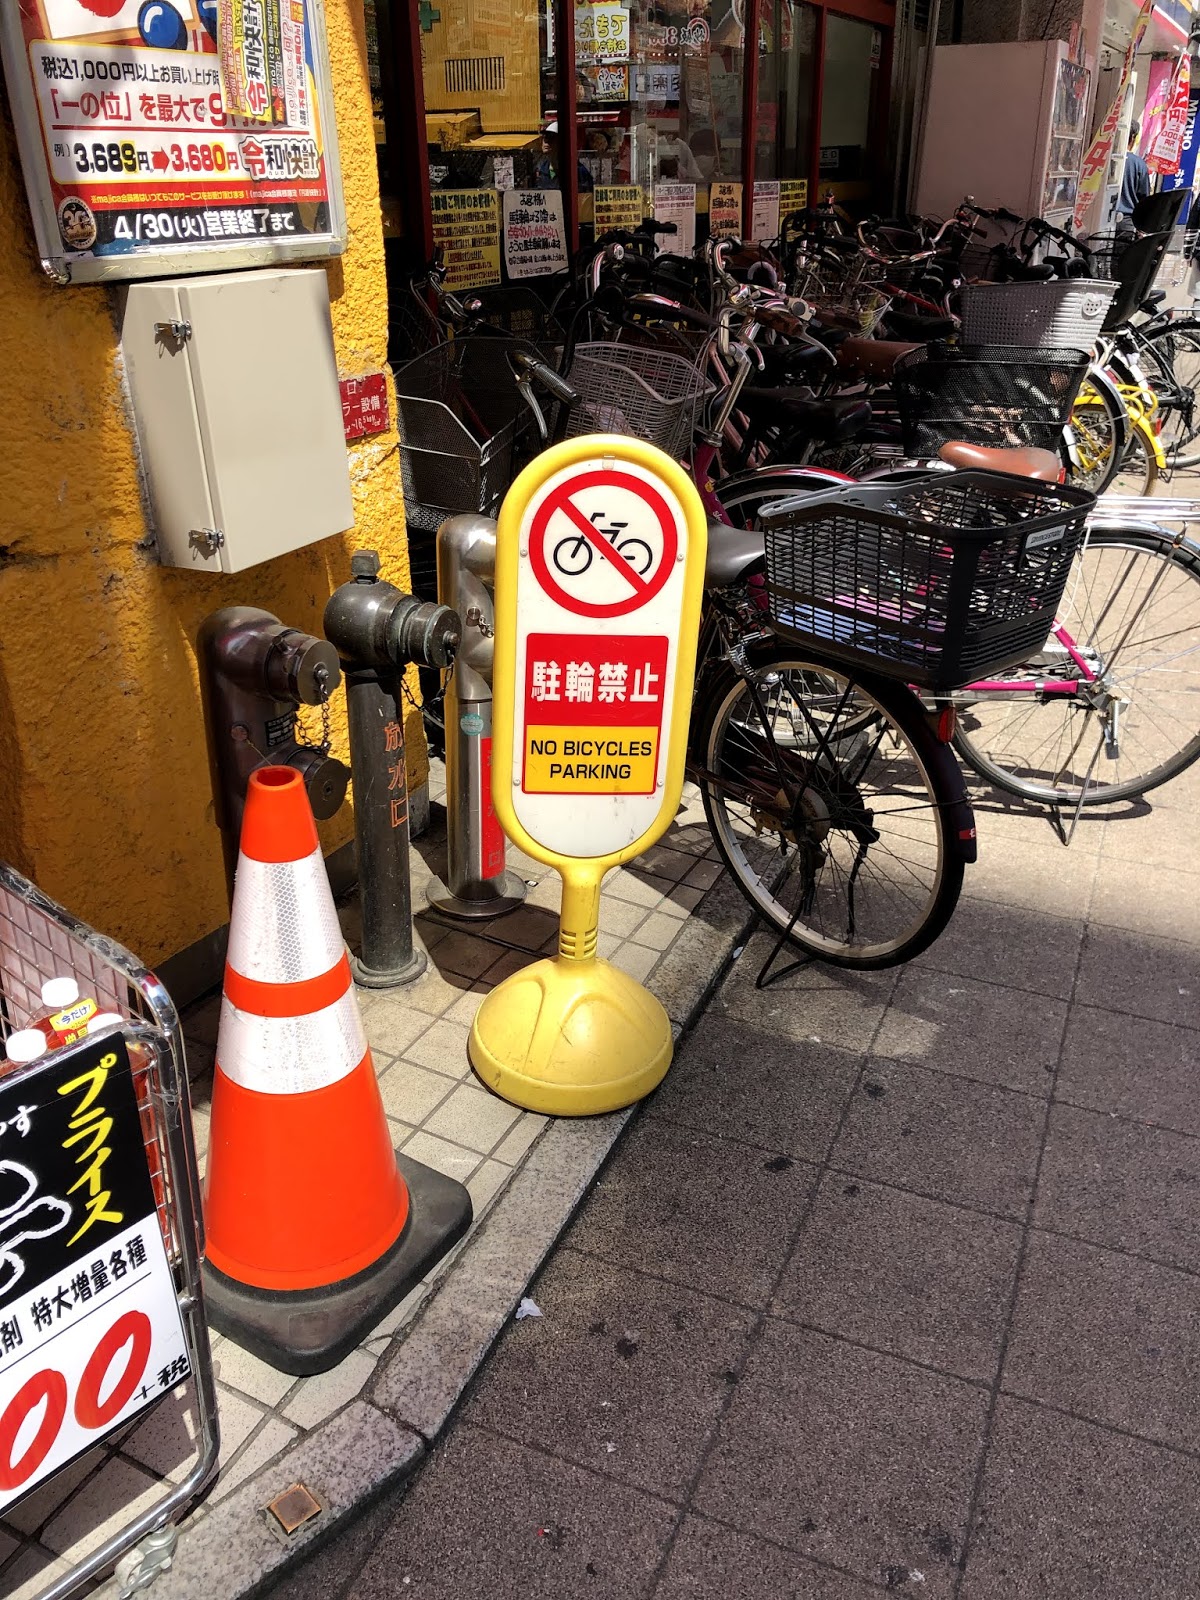 THINGS THAT ARE ILLEGAL IN JAPAN BUT PEOPLE DO IT ANYWAYS